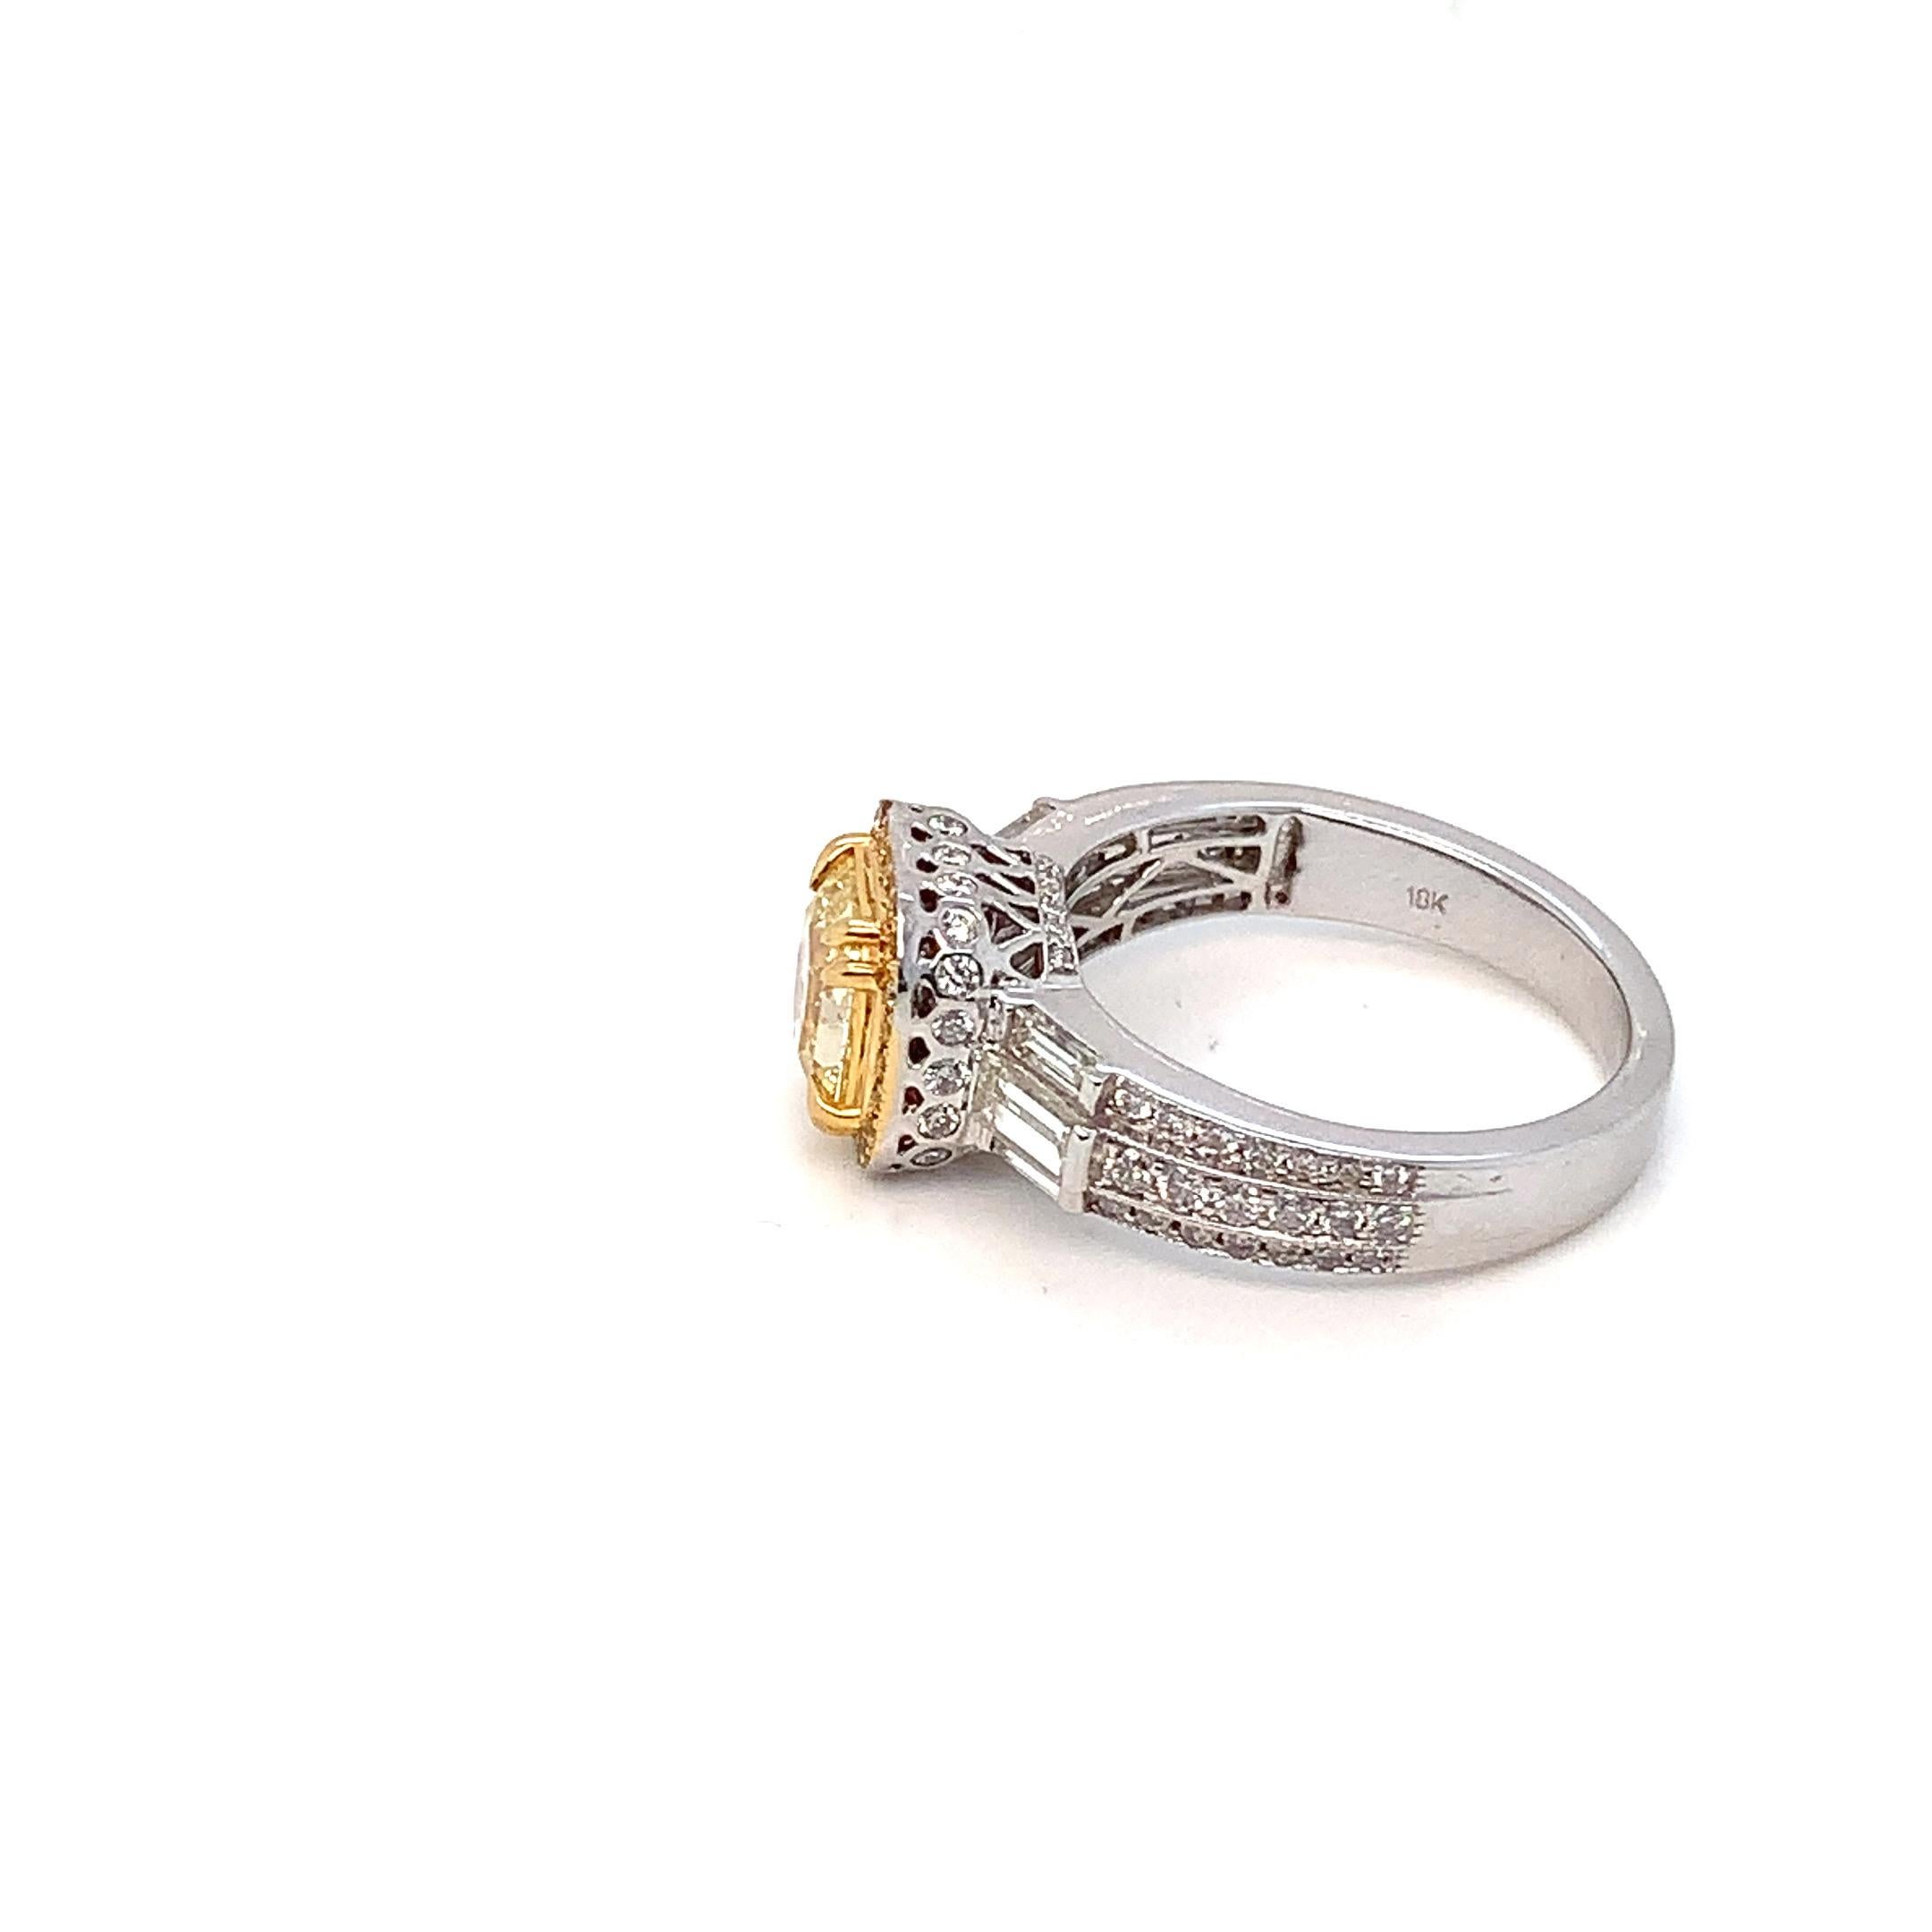 Radiant Cut GIA Certified 1.59 Carat Fancy Yellow Diamond Cocktail Ring For Sale